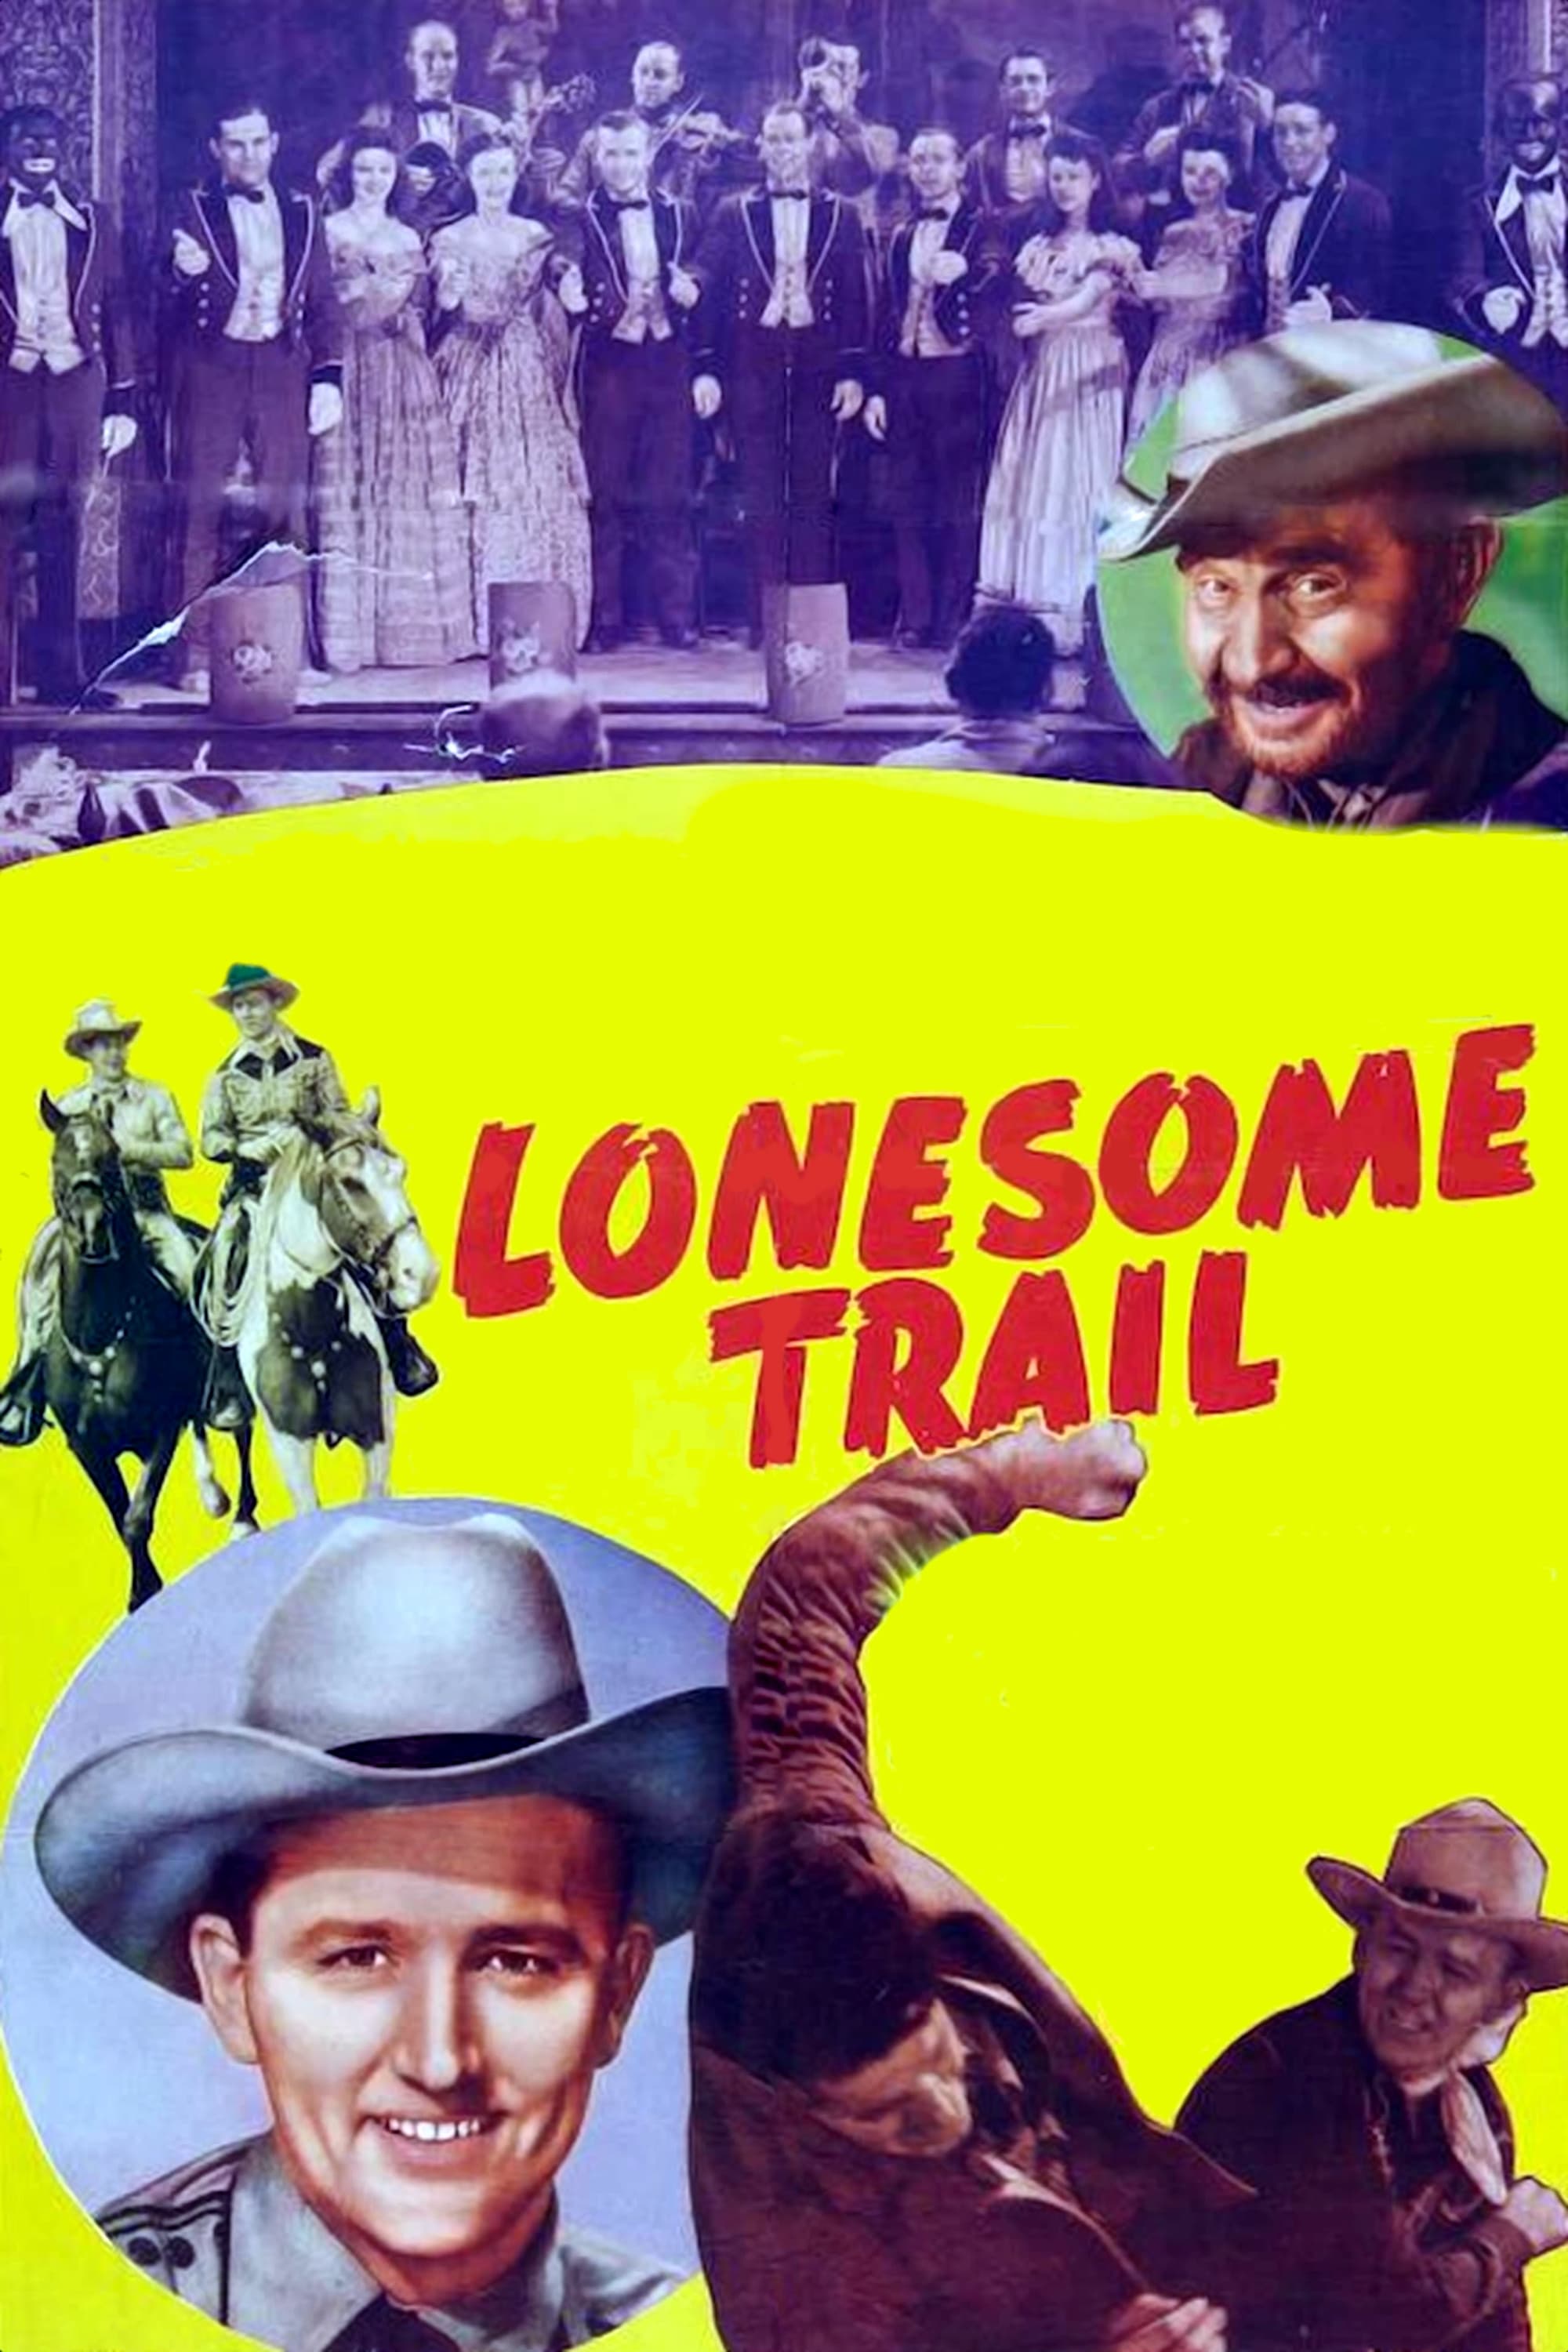 Lonesome Trail